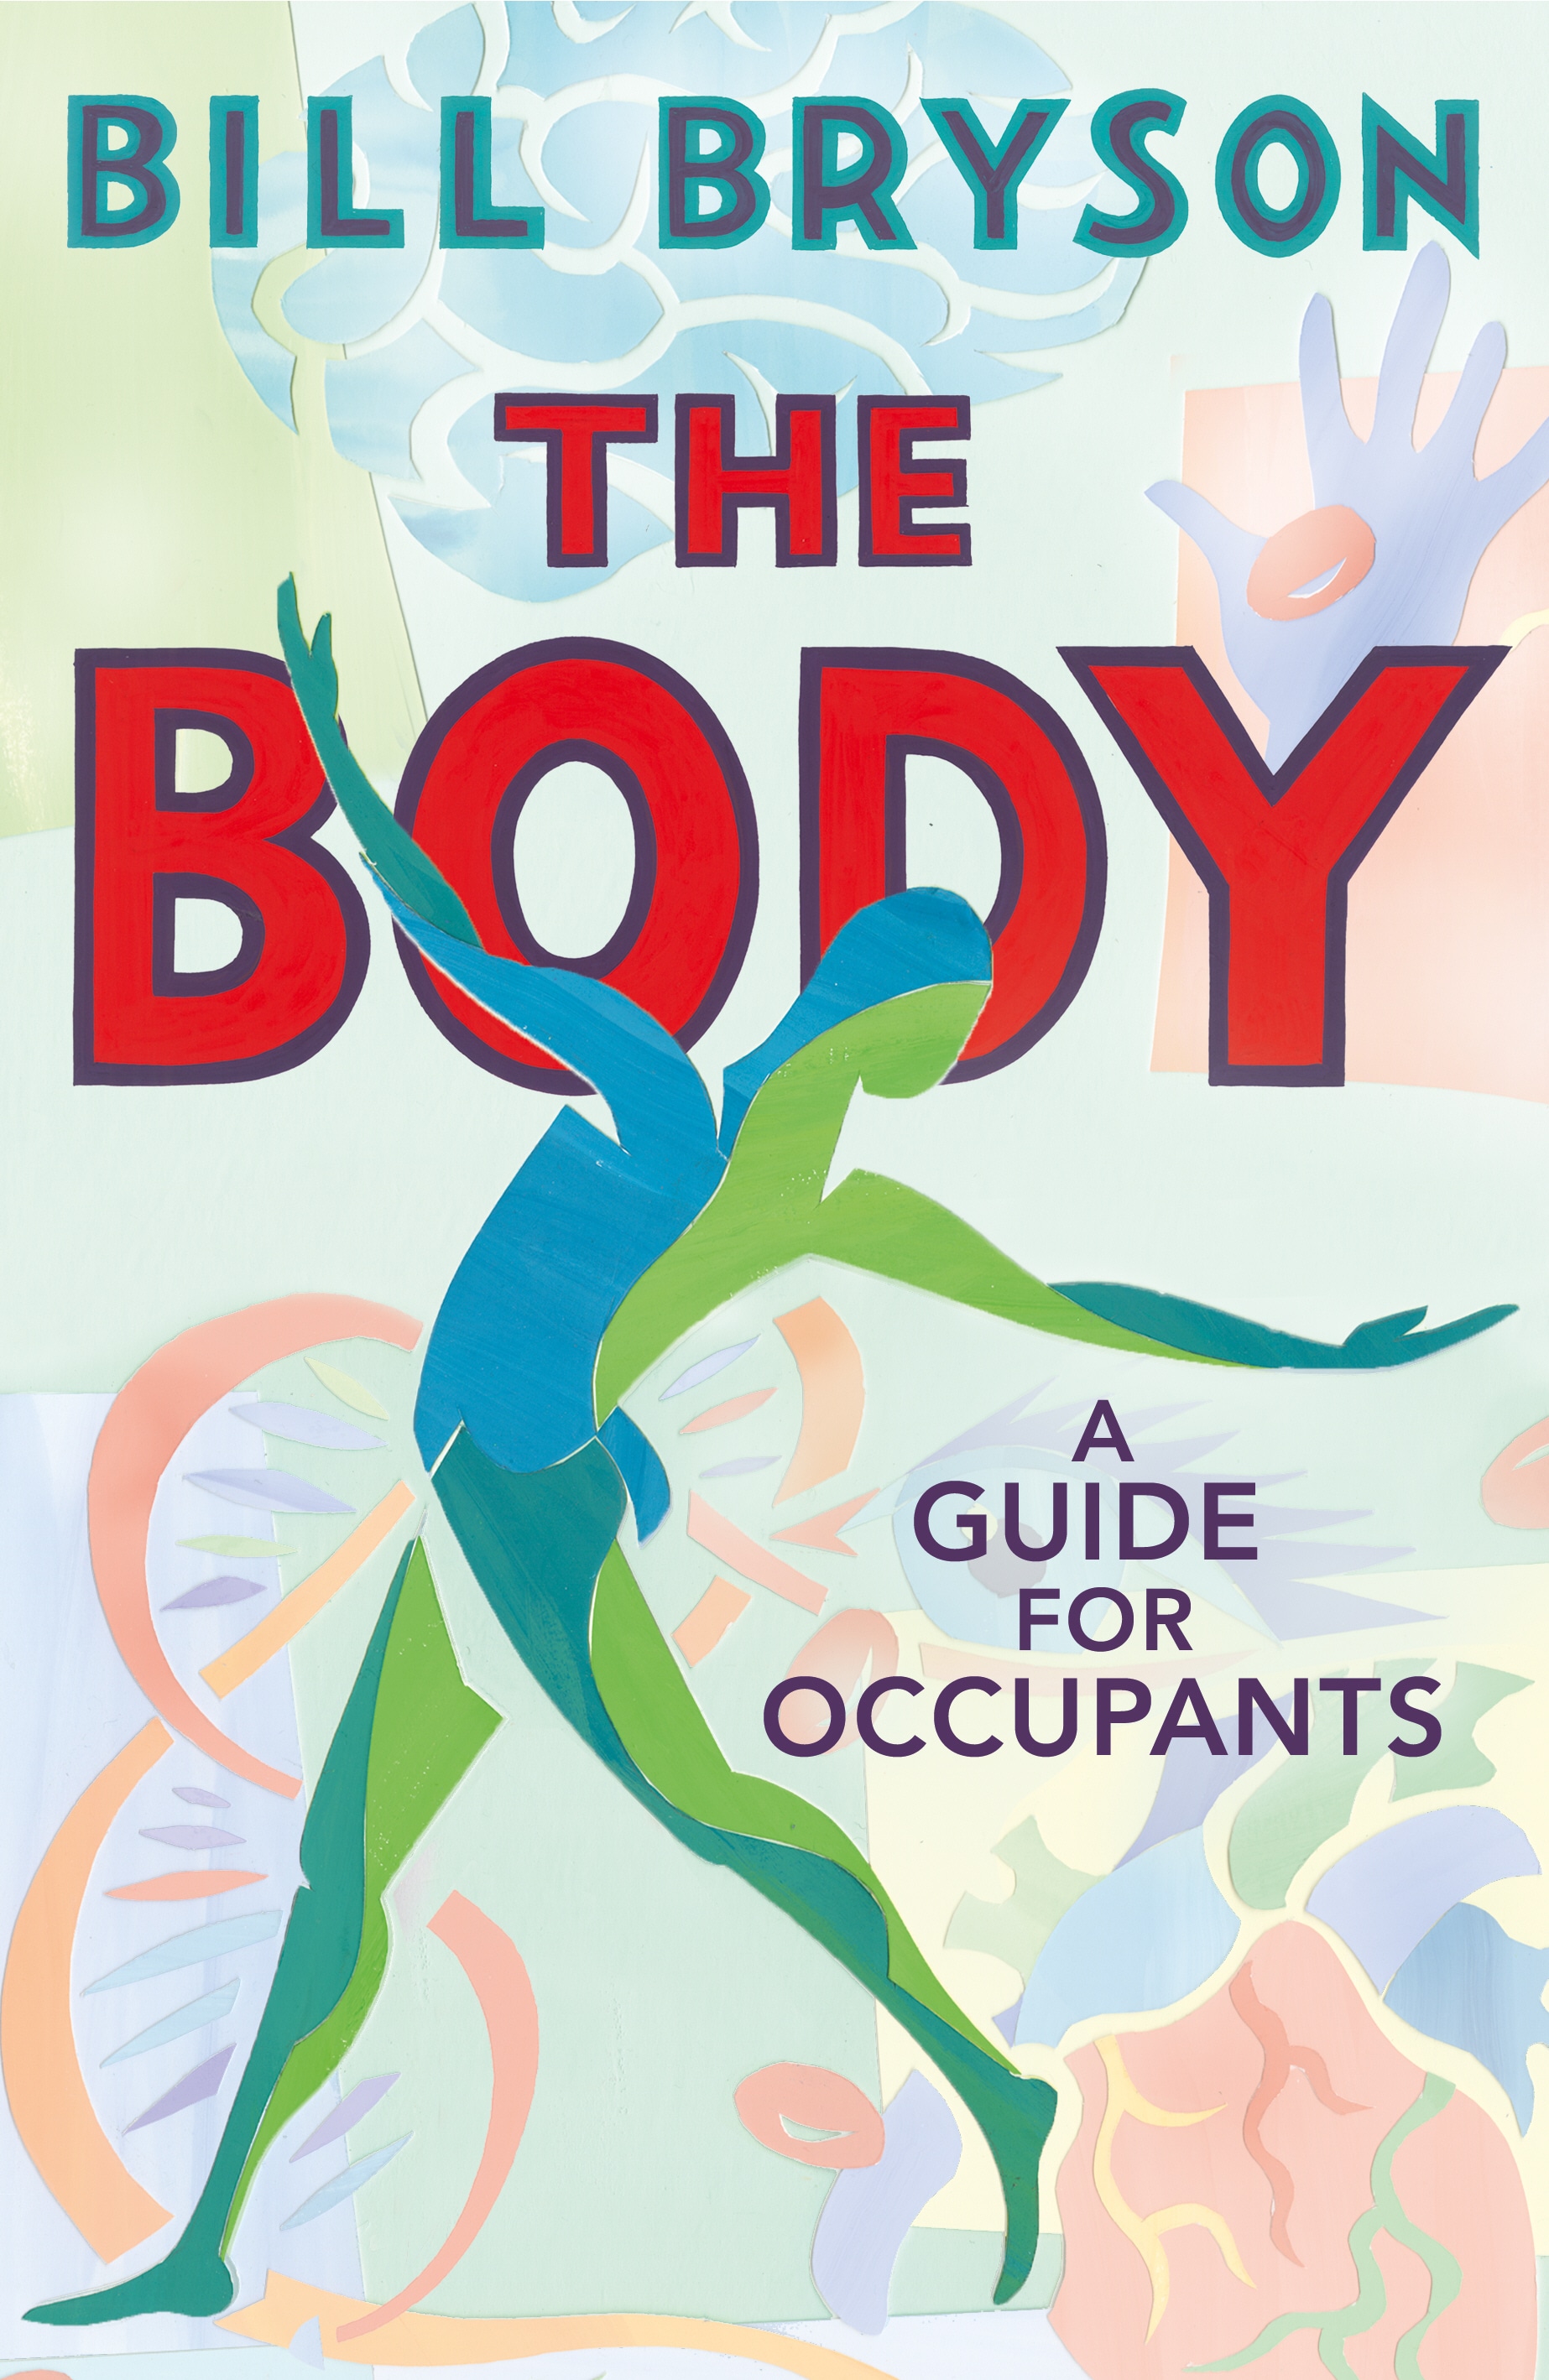 Book “The Body” by Bill Bryson — October 3, 2019